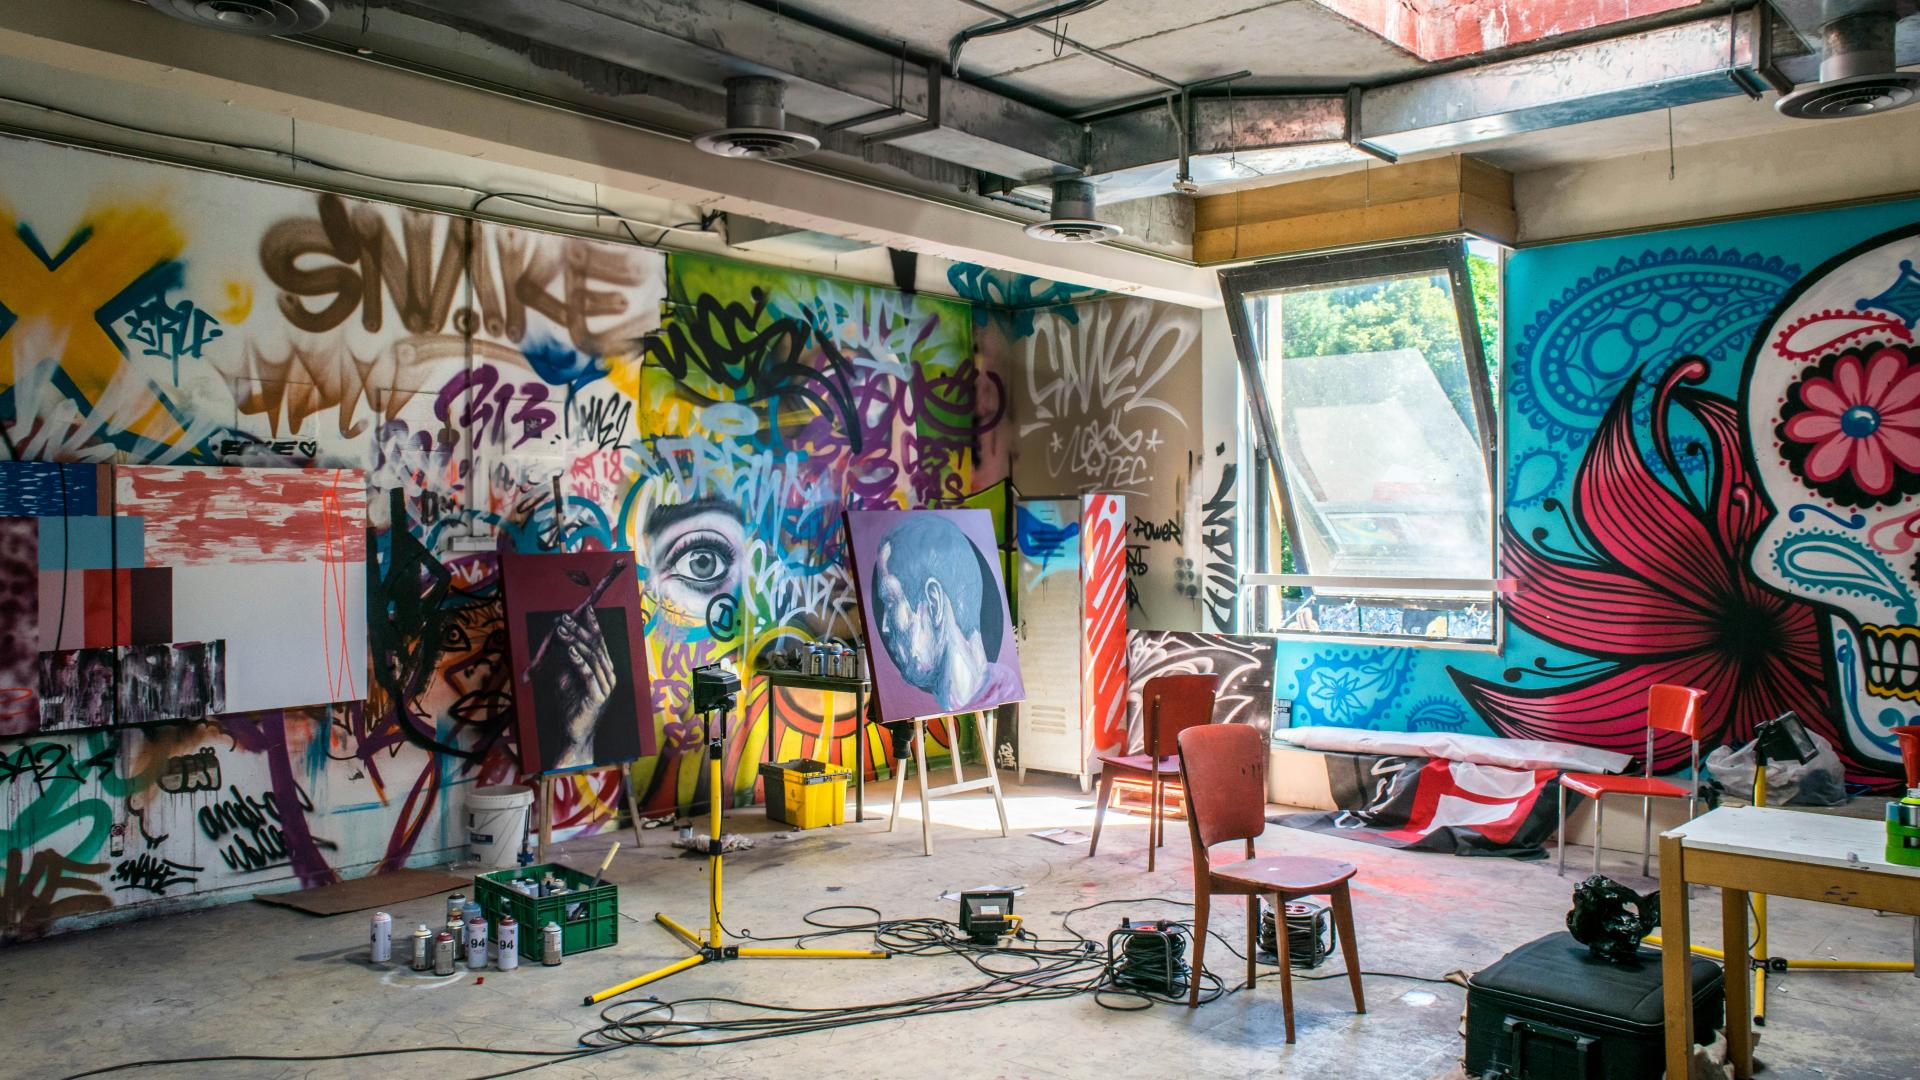 Cheap Art Studios for Hire in London